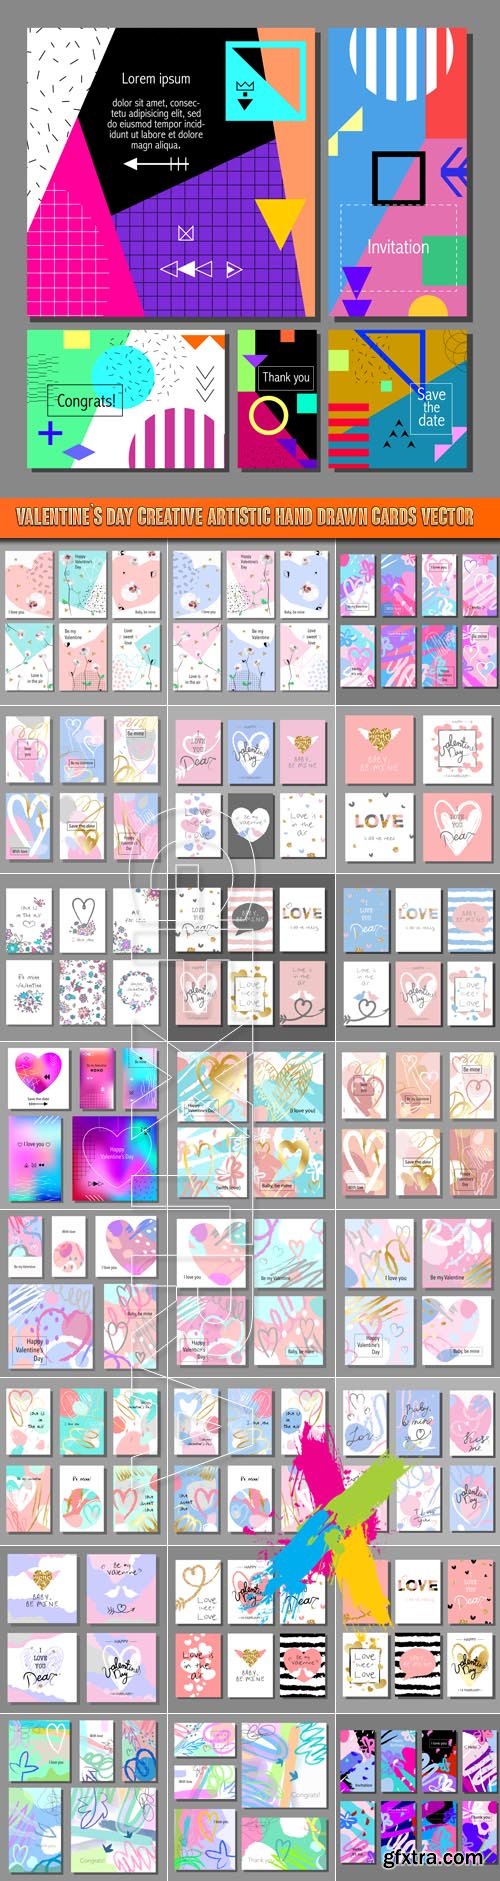 Valentine`s Day creative artistic hand drawn cards vector